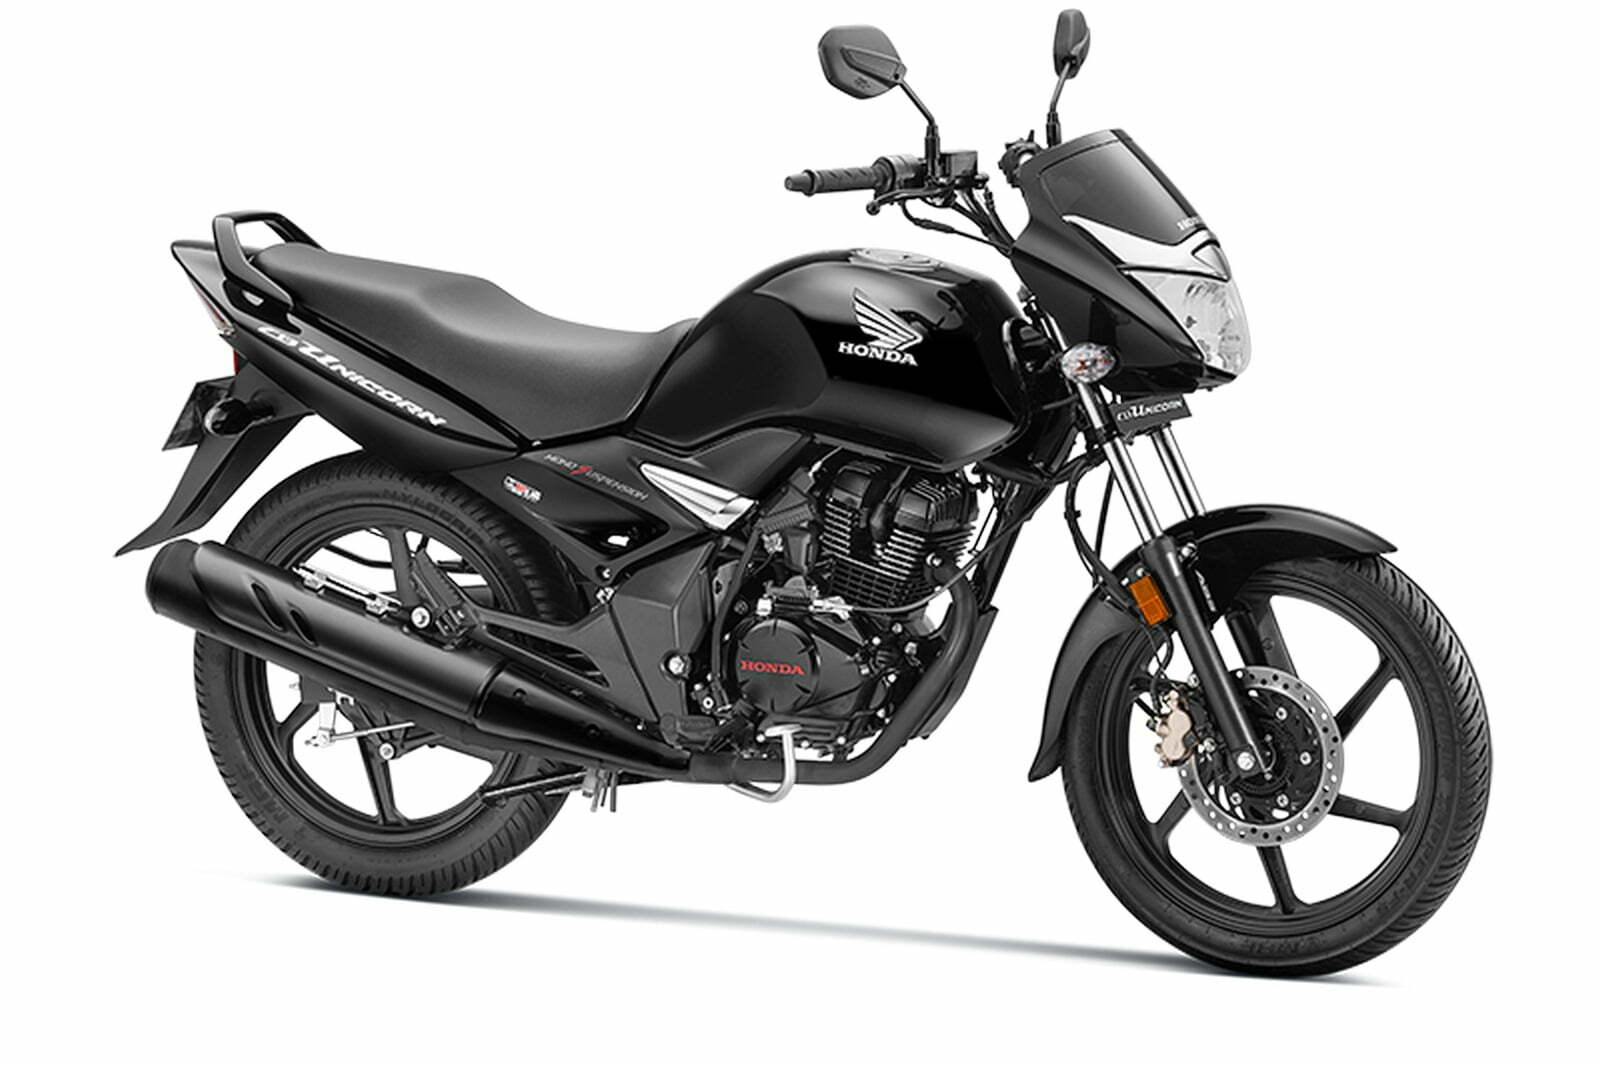 2019 Honda Unicorn 150 Abs Launched Know Price And Details